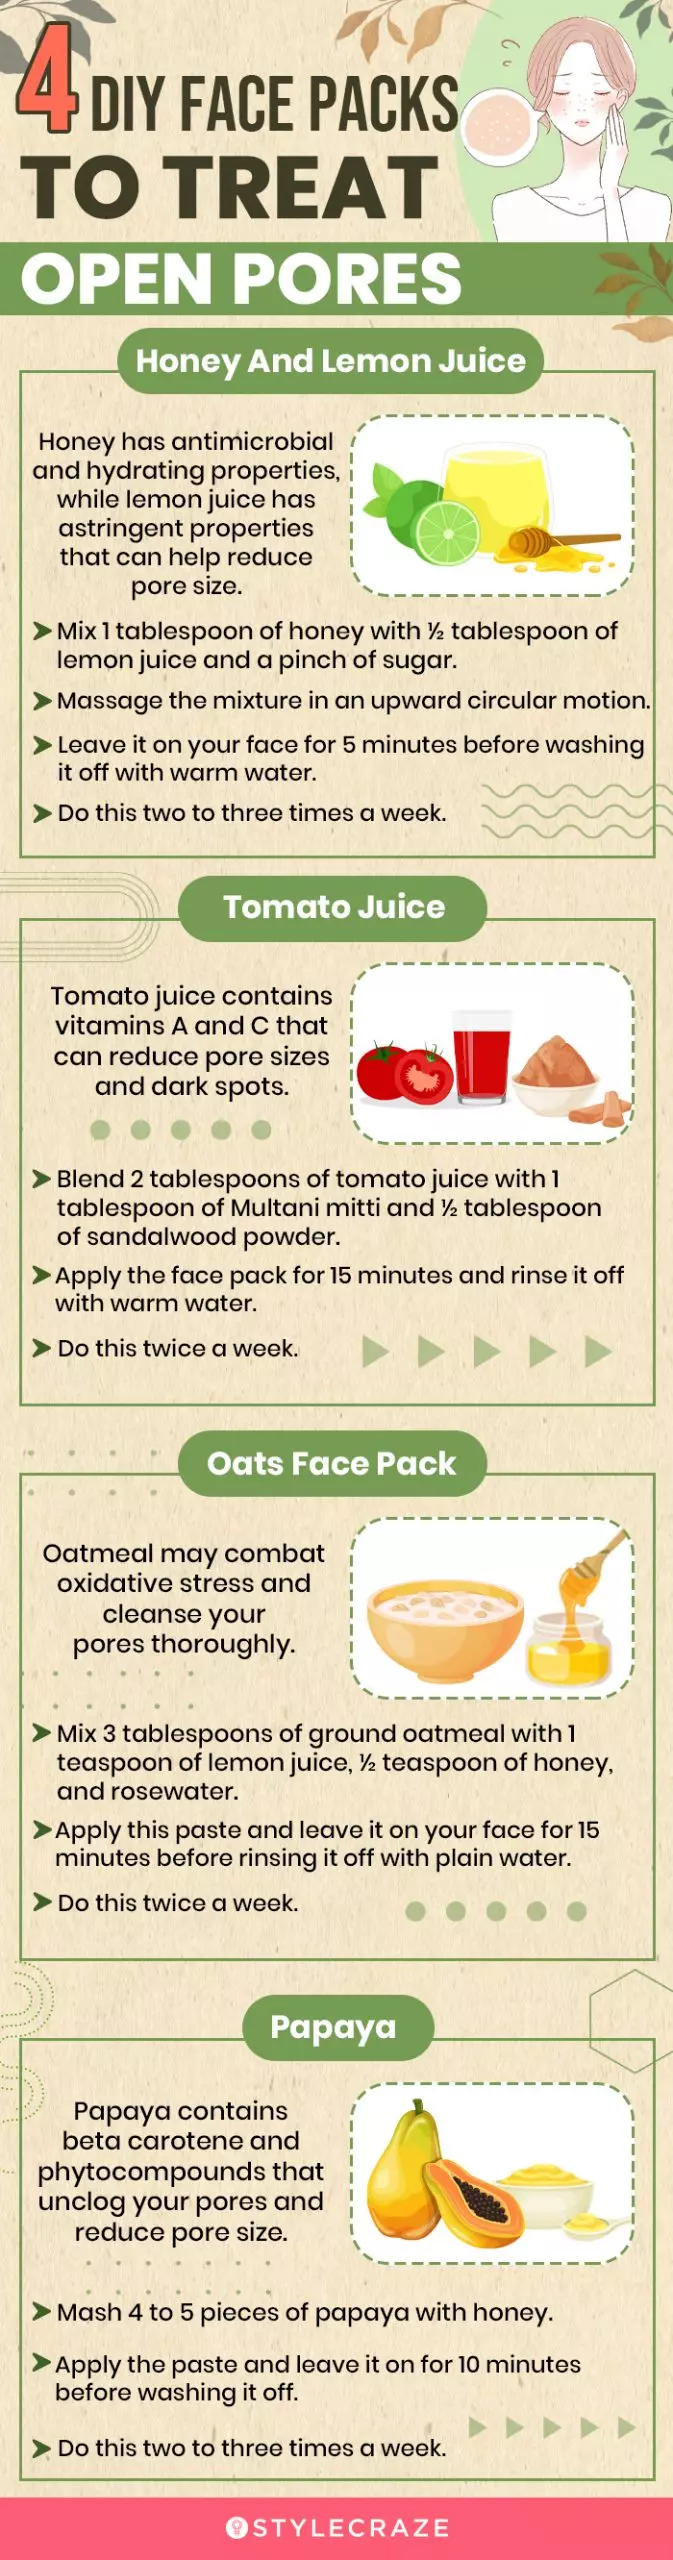 4 diy face packs to treat open pores (infographic)